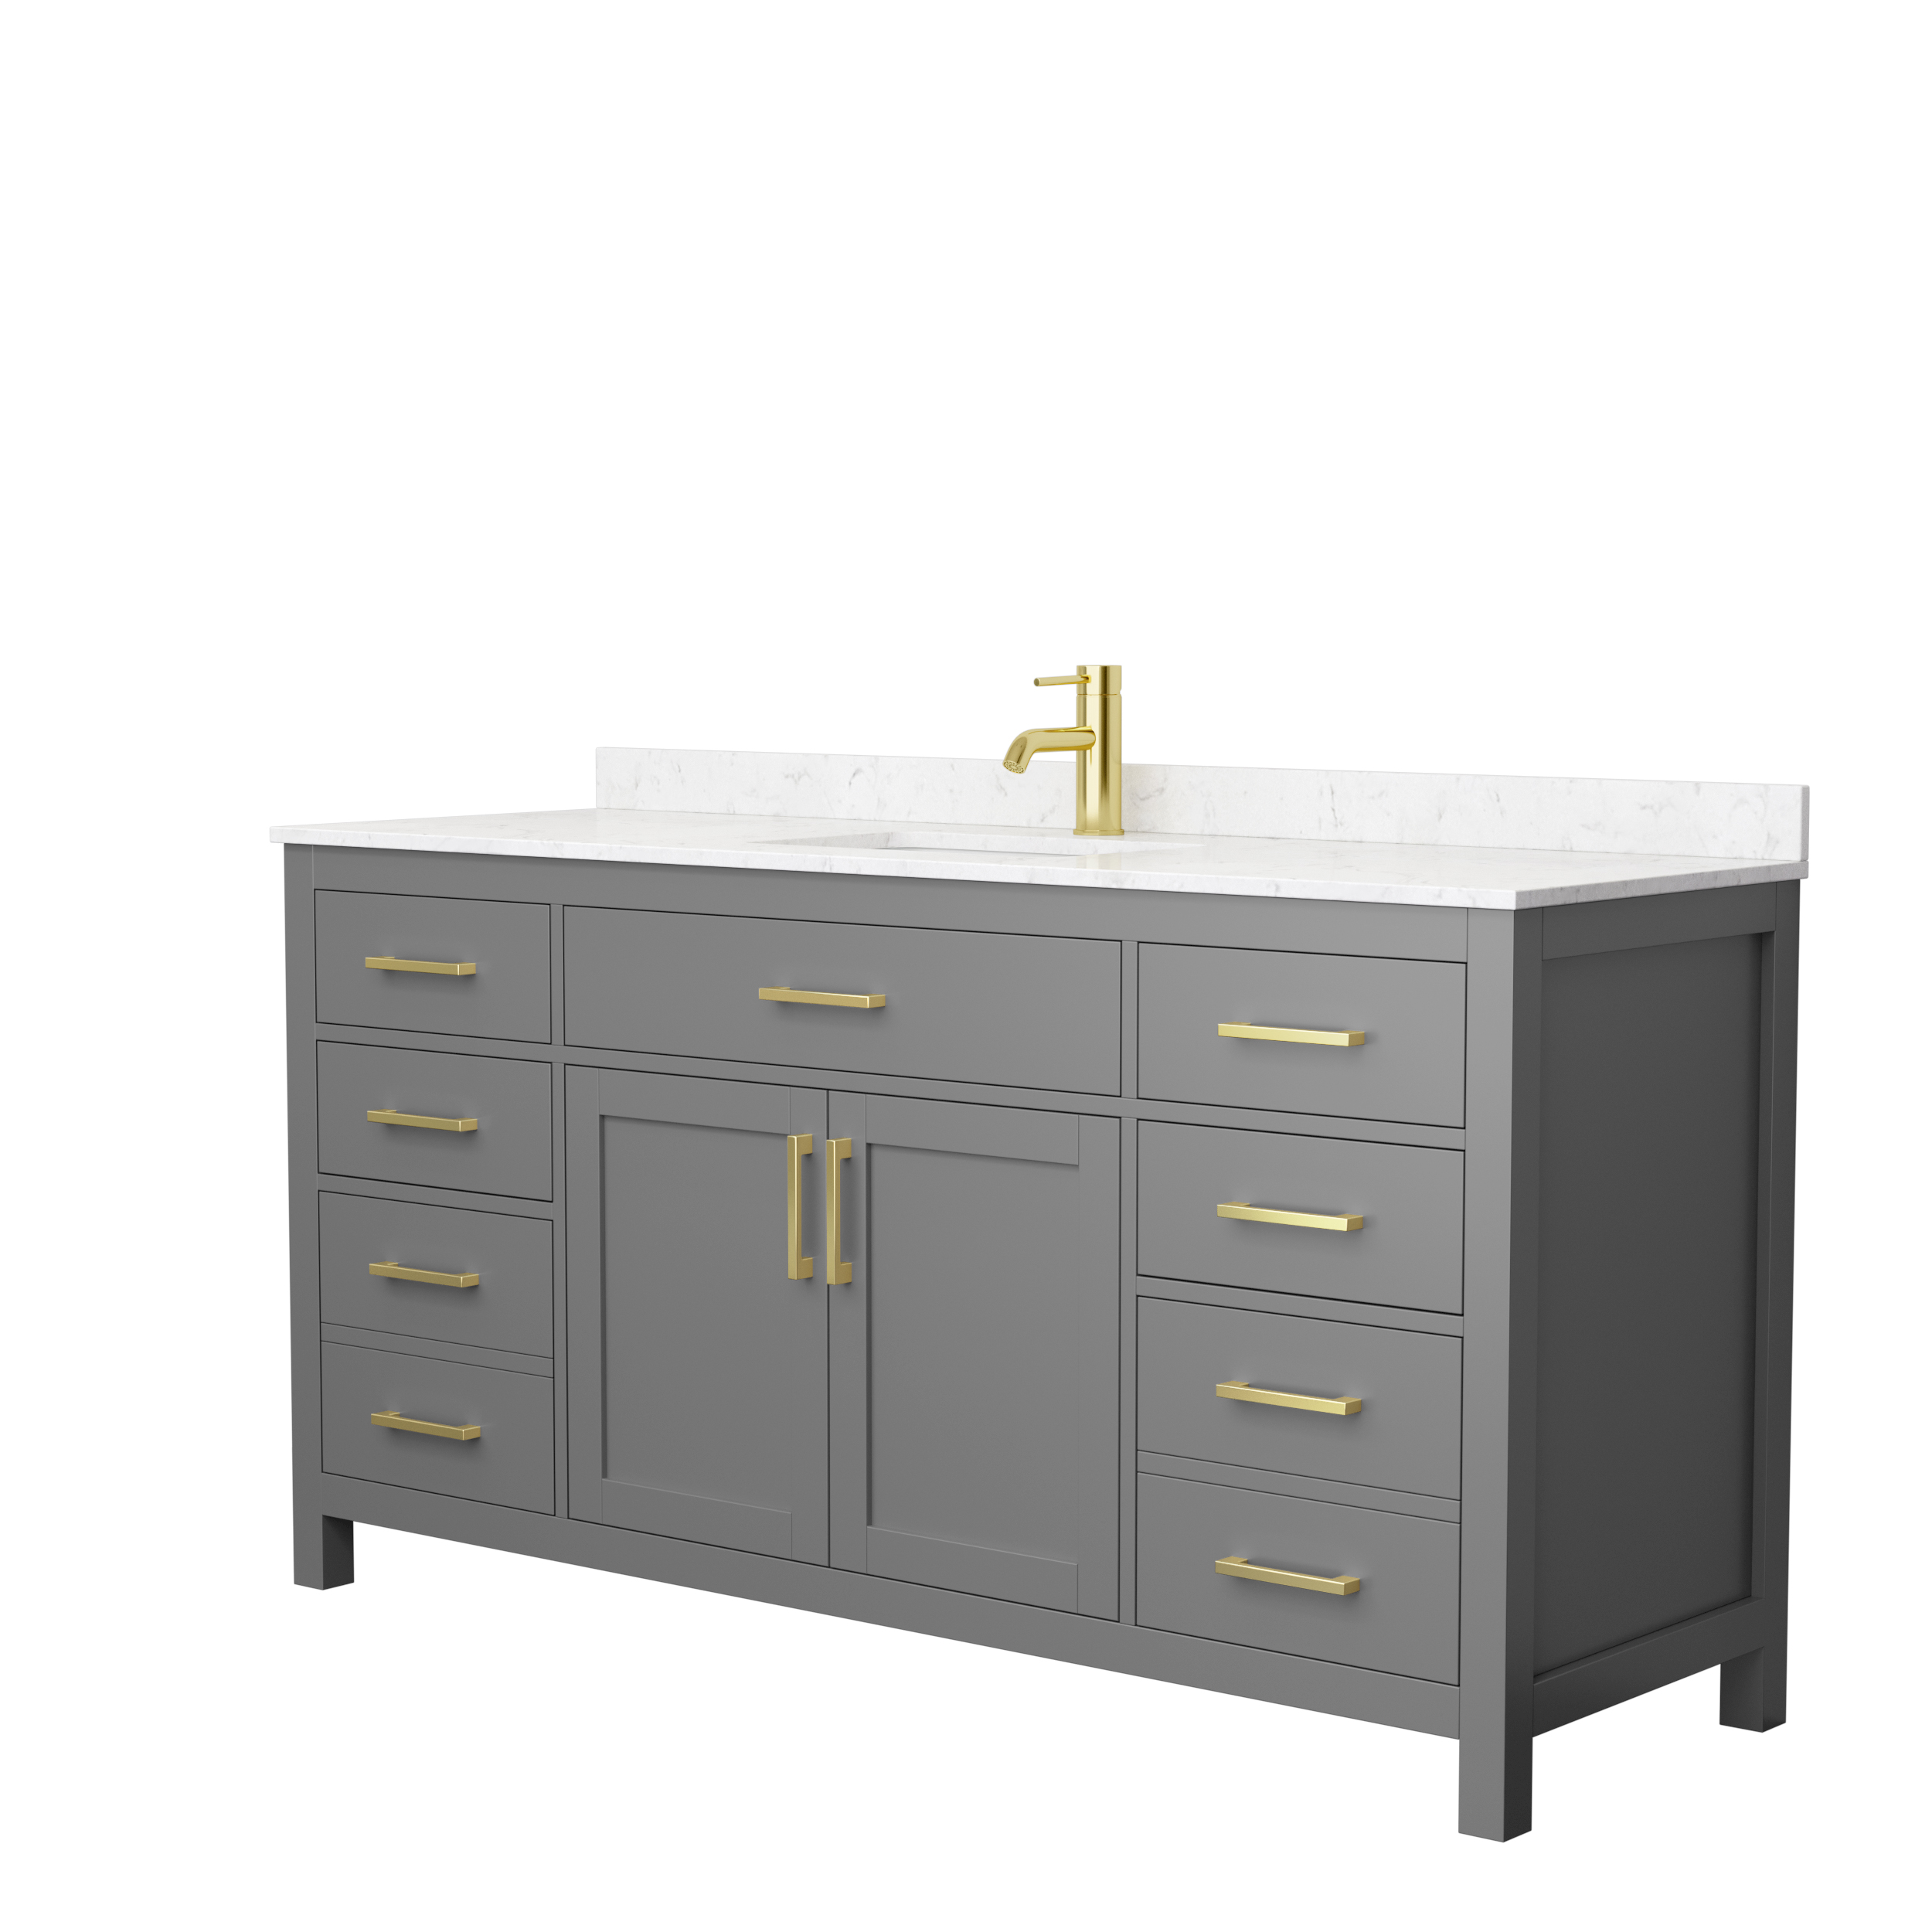 66" Single Bathroom Vanity in Dark Gray or White, Carrara Cultured Marble Countertop, Undermount Square Sink, Brushed Gold Trim 